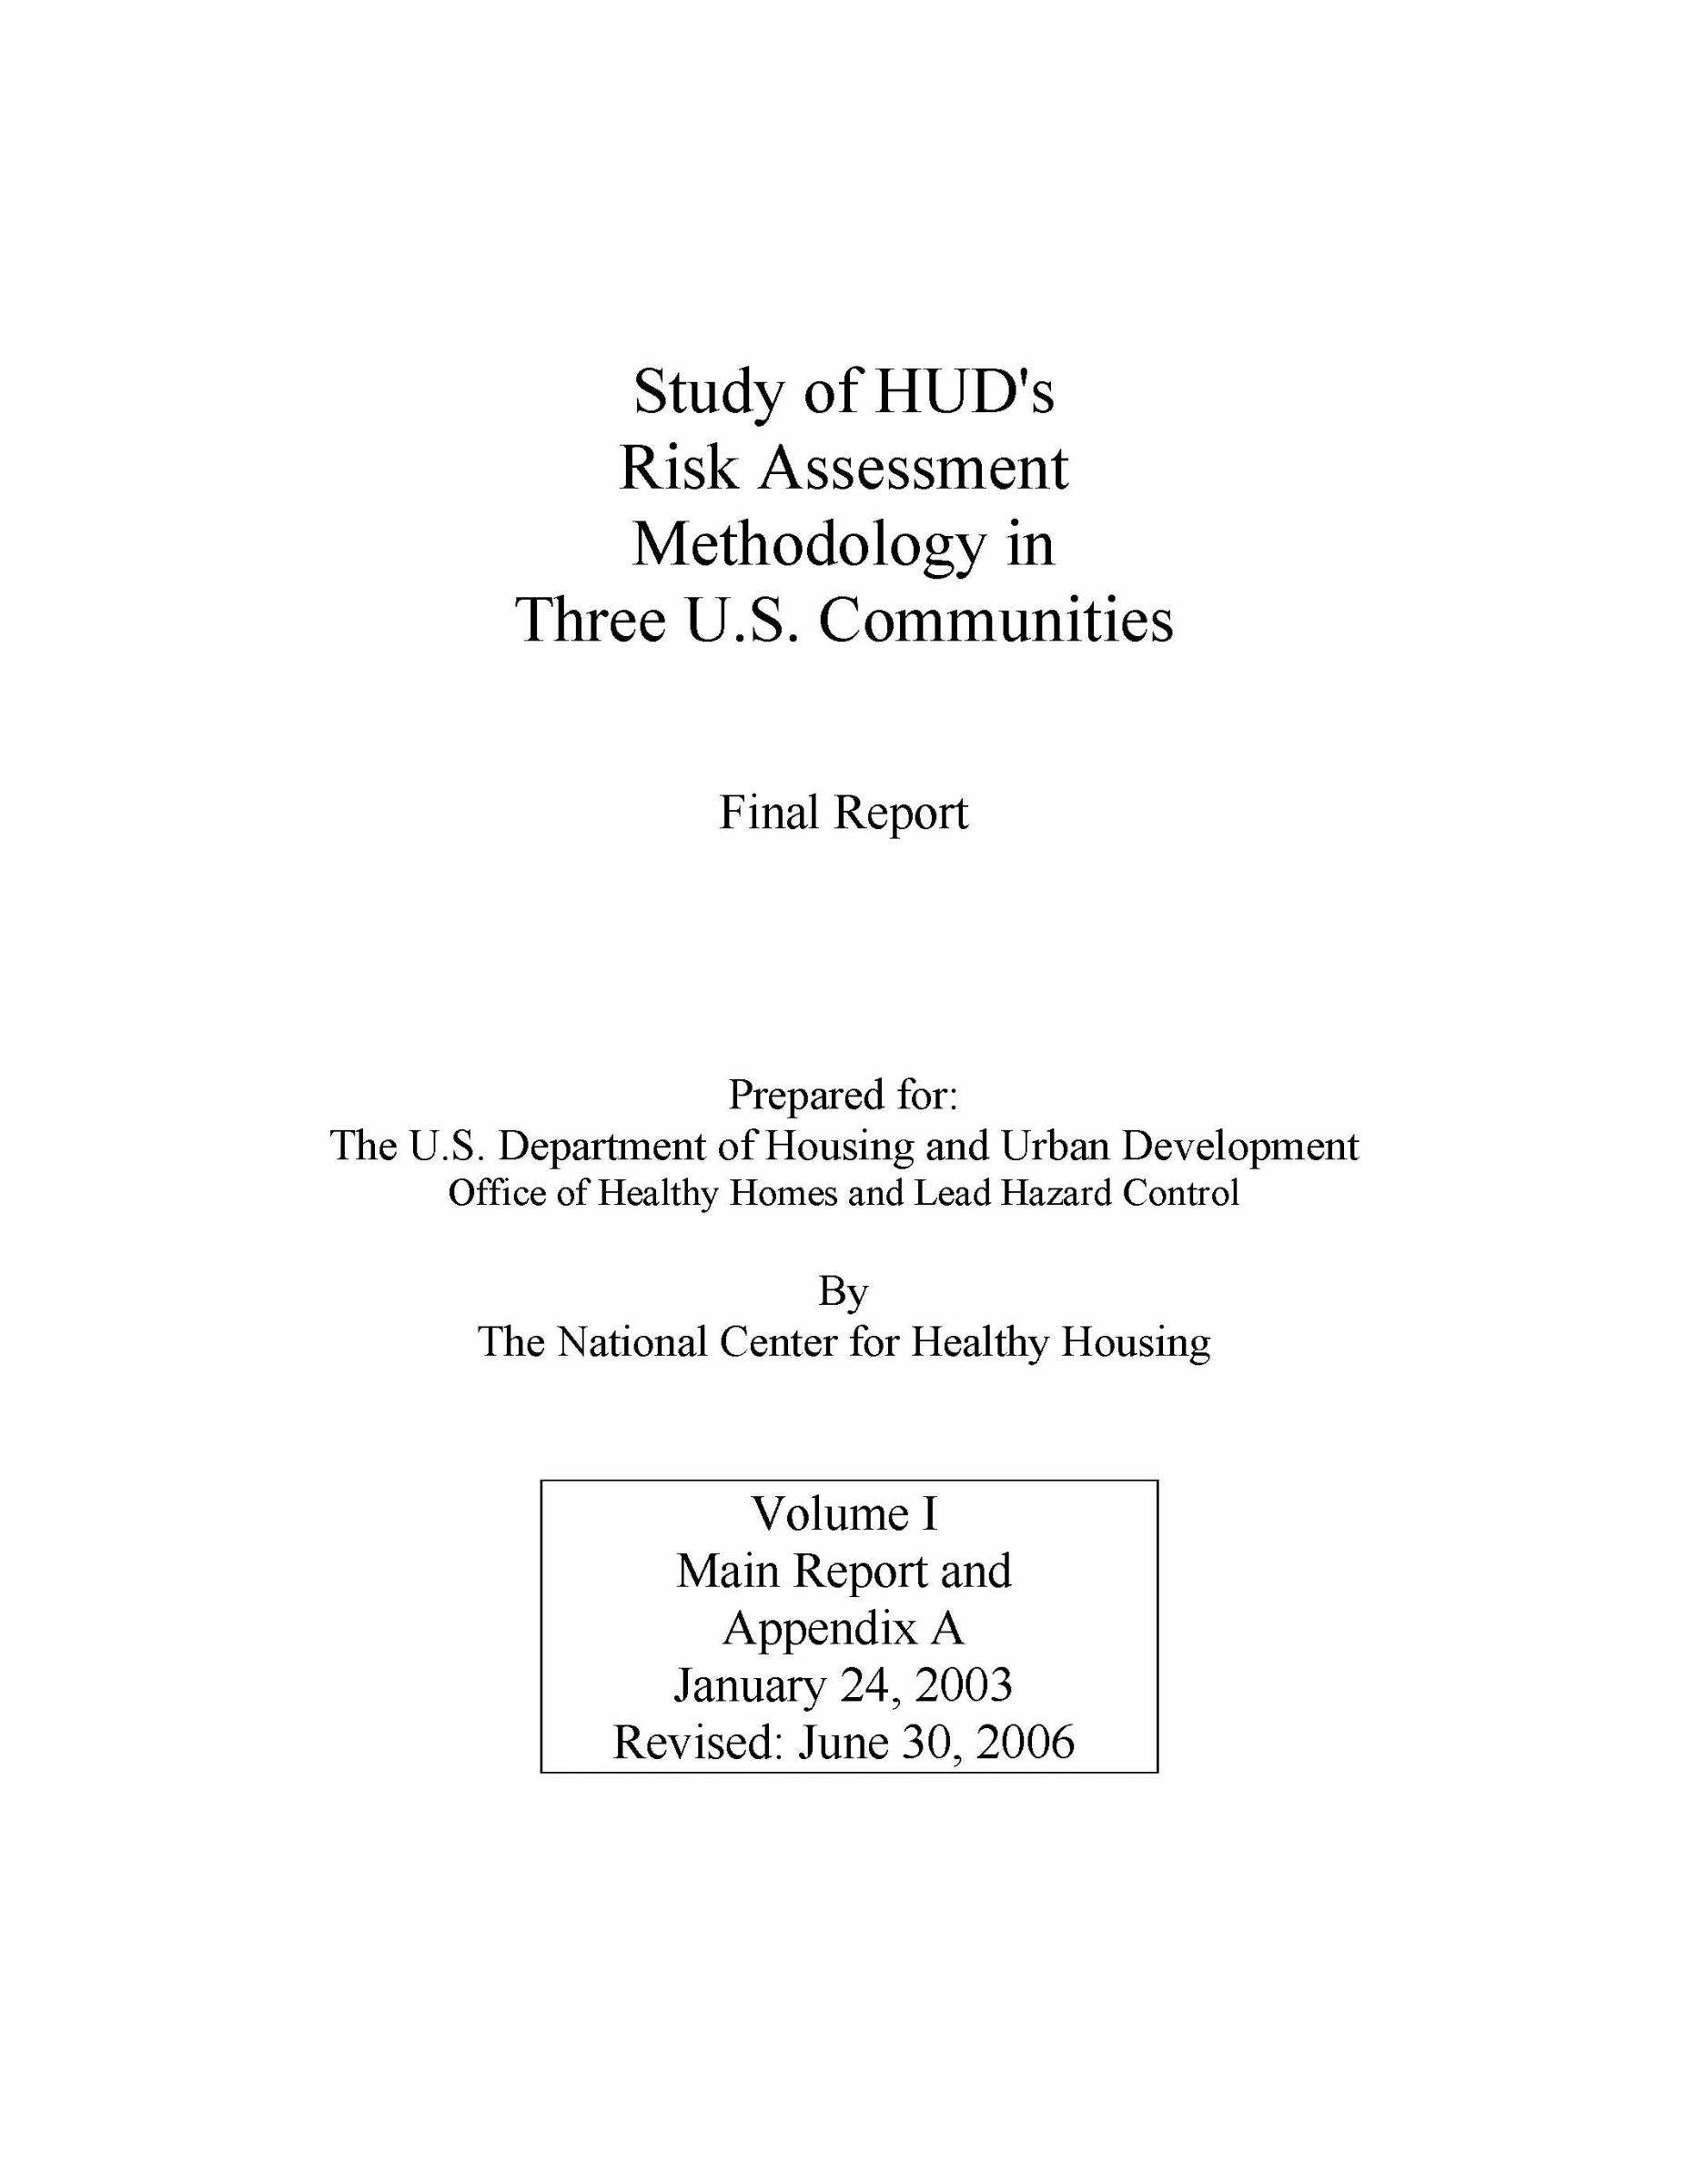 Study of HUD's Risk Assessment Methodology in Three U.S. Communities: Final Report – Volume I: Main Report and Appendix A